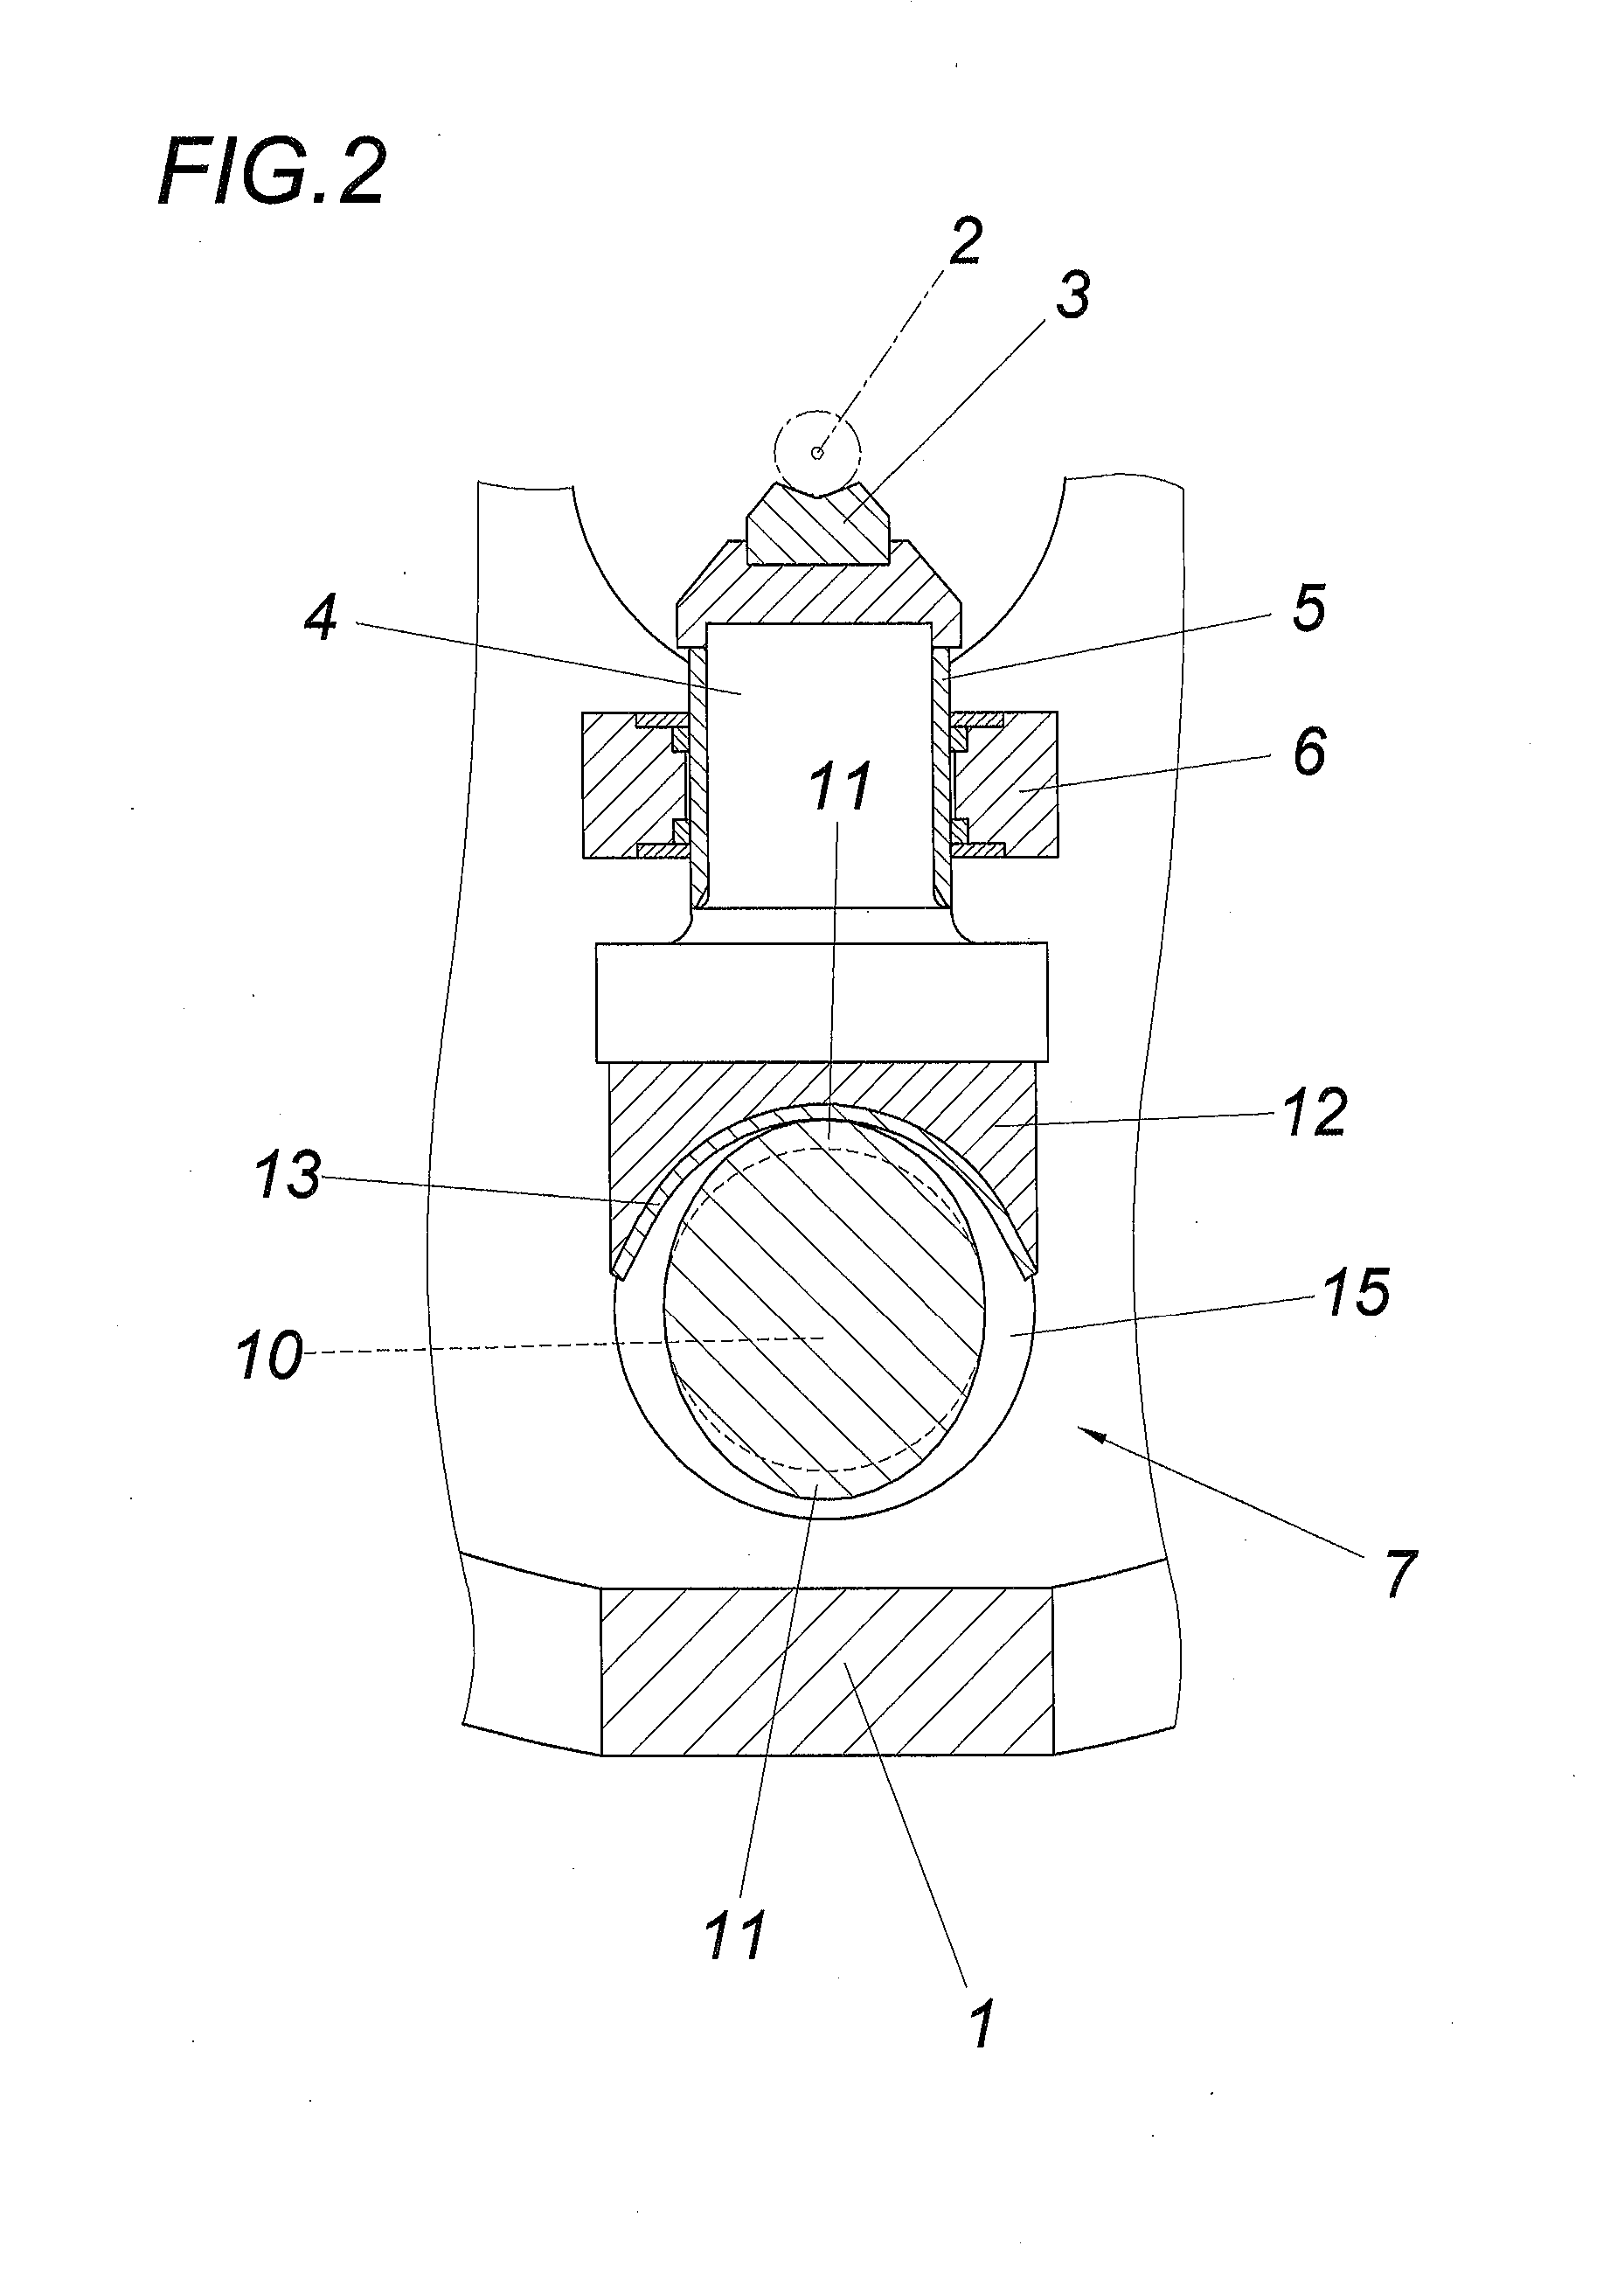 Forging apparatus with forging rams guided in the direction of stroke and accommodating forging tools